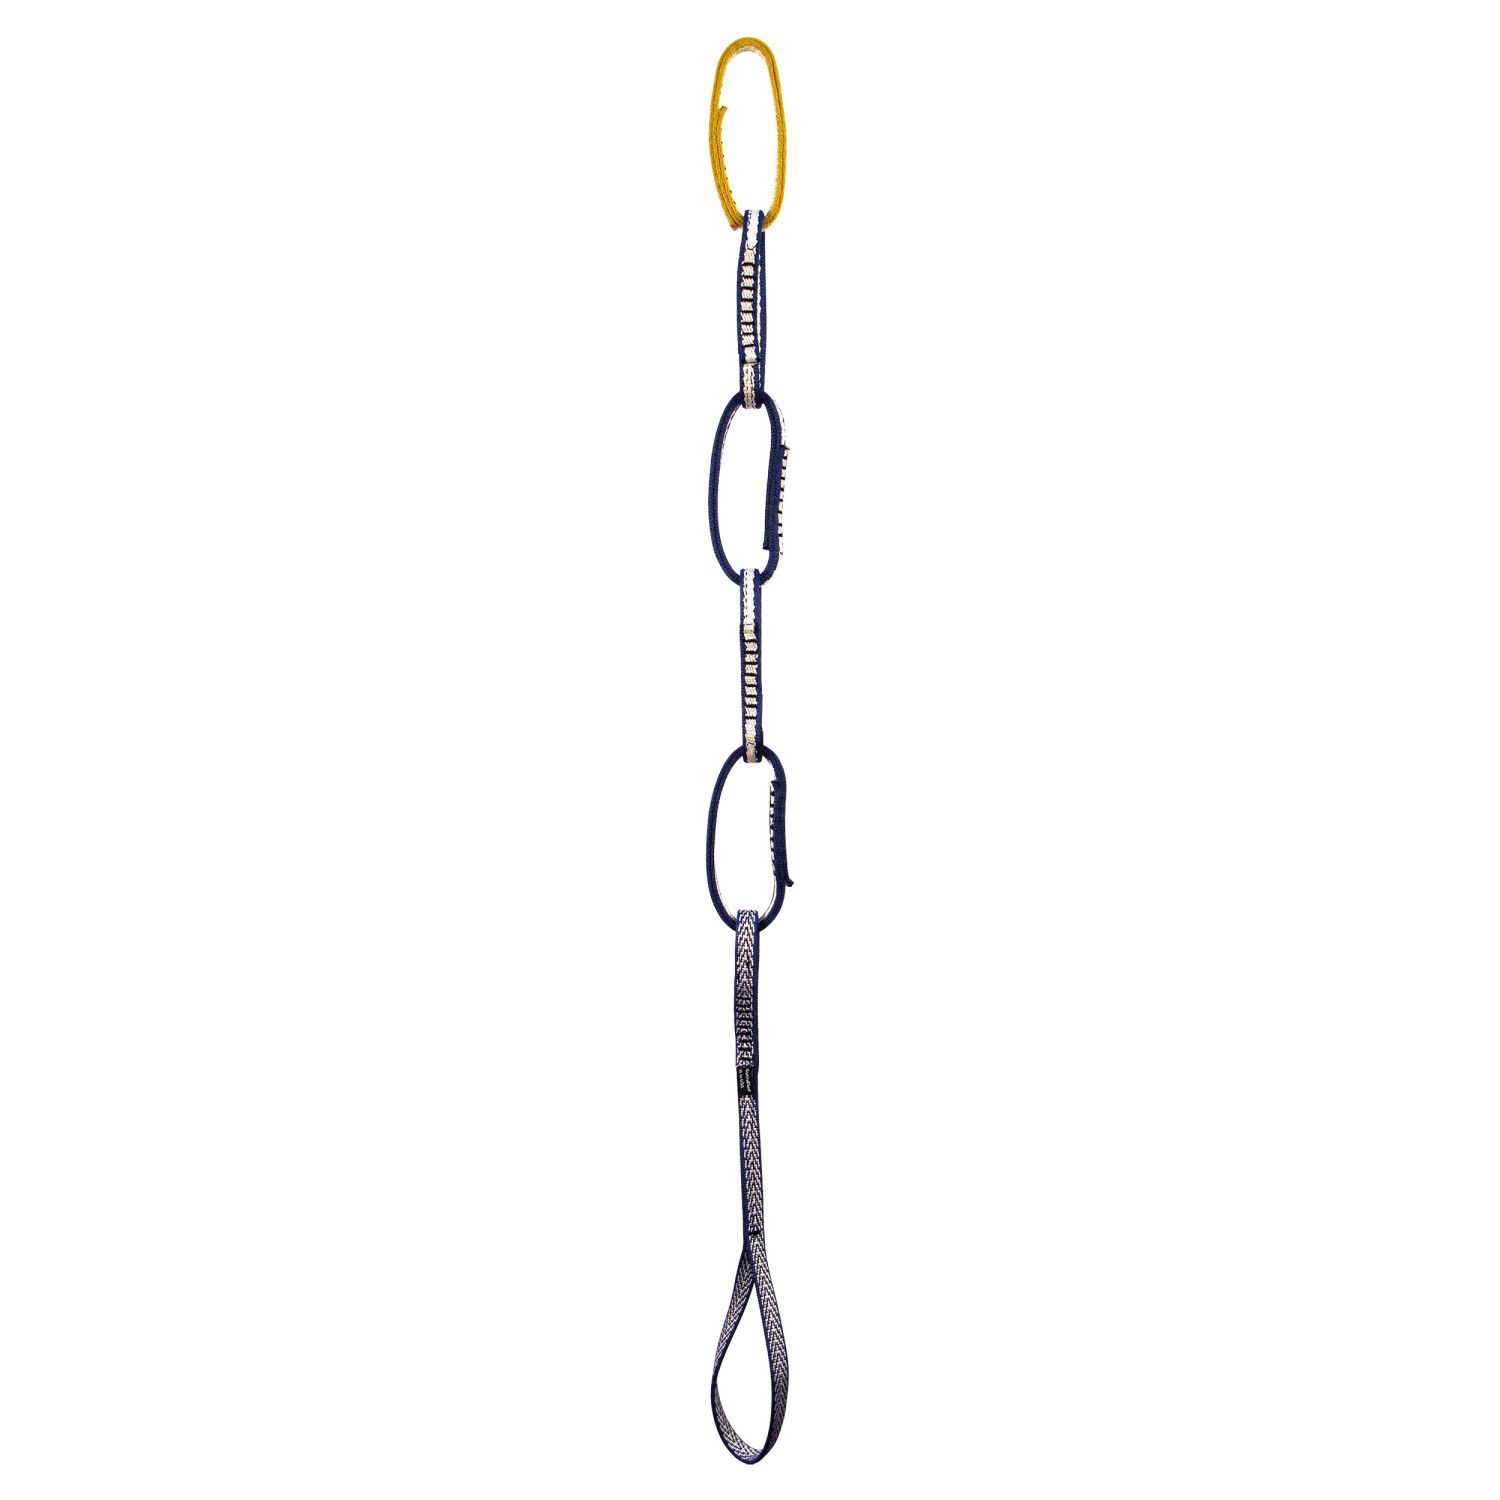 Metolius PAS 22 kN Personal Anchoring System